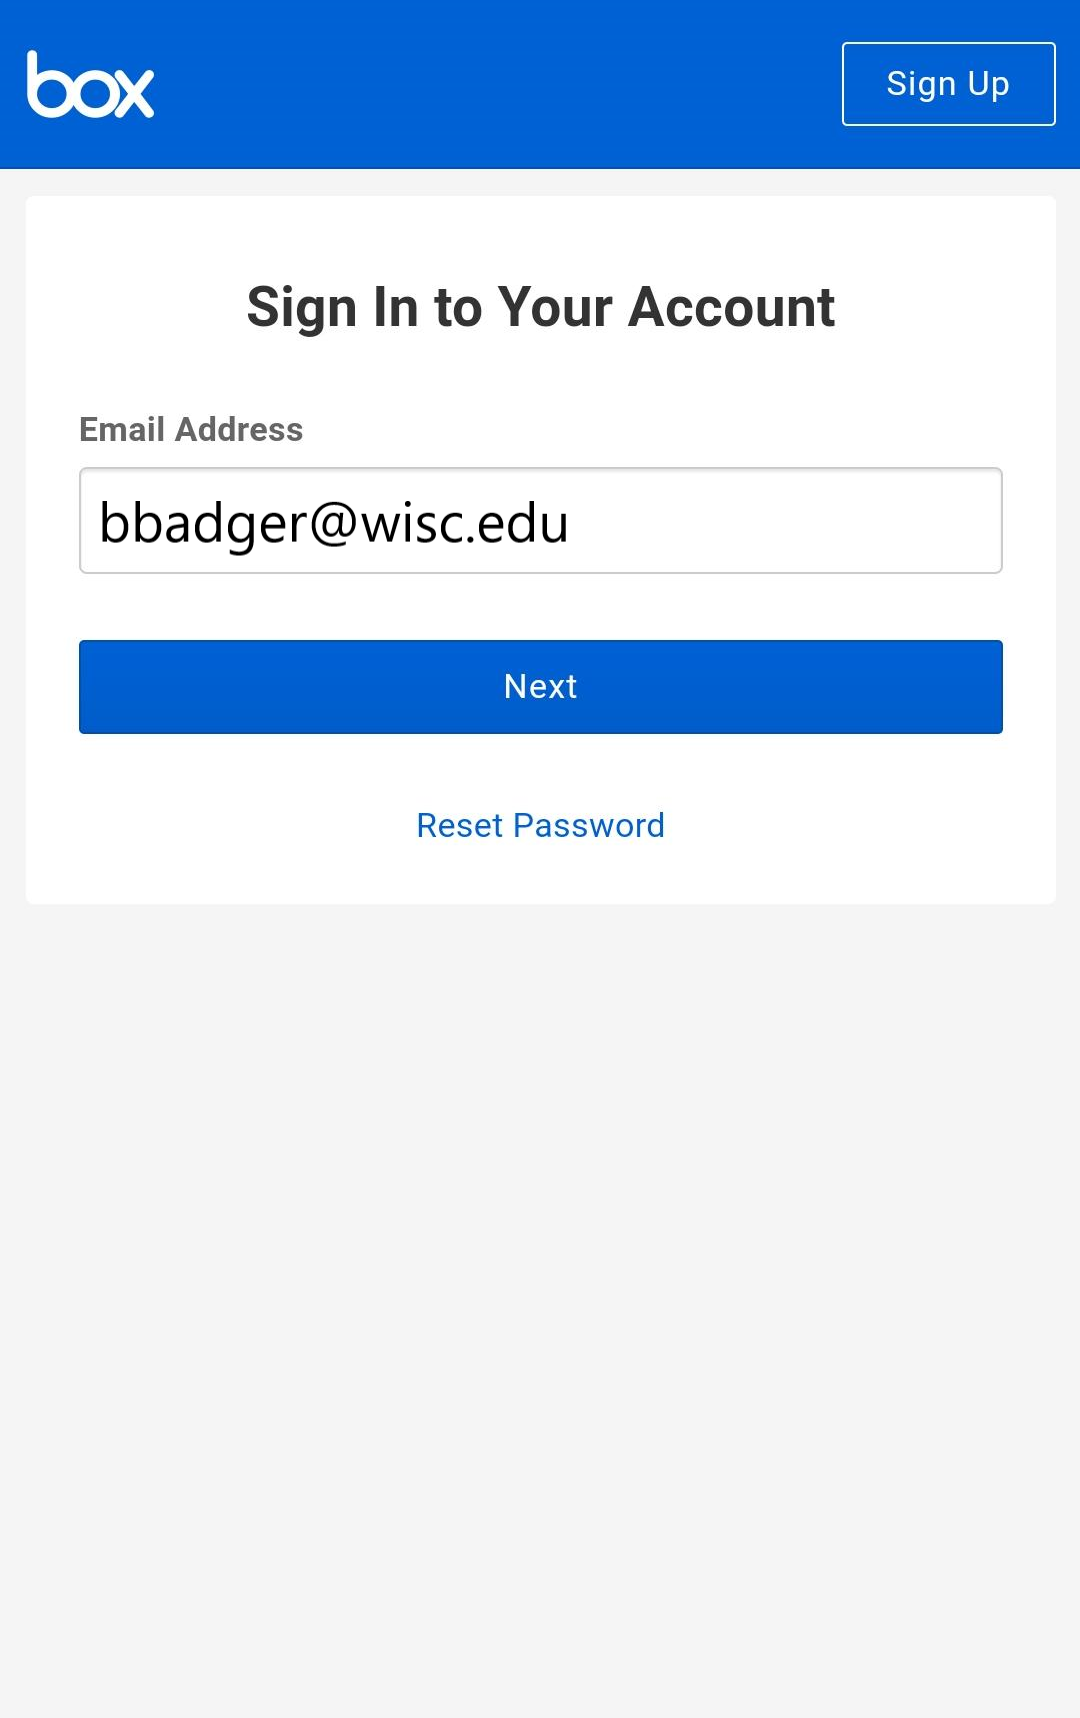 A text box with the email "bbadger@wisc.edu" typed in and a button that says "Next"